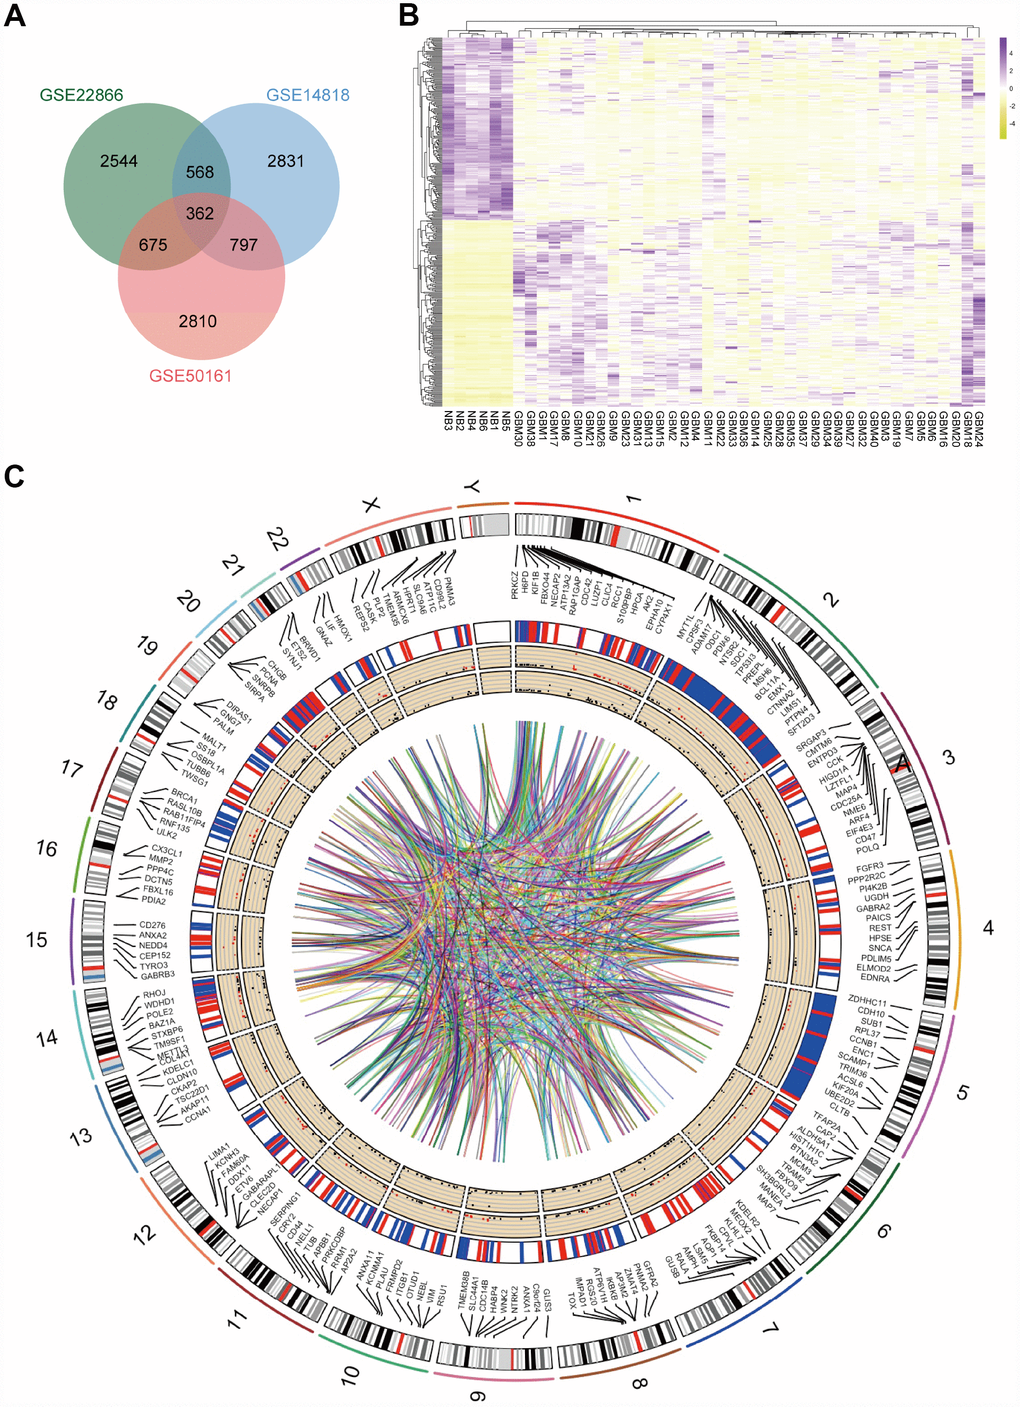 Identification of DEGs in mRNA datasets GSE14818, GSE22866 and GSE50161. (A) Venn diagram presents overlapping relationships, and 362 DEGs were identified. (B) Cluster analysis of DEGs using data profile GSE22866 as a reference. Data are presented as a heat map. (C) Circos plot showing DEGs on human chromosomes. From the outside in, the first layer of the circos plot is a chromosome map of the human genome, black and white bars are chromosome cytobands, and red bars represent centromeres. Due to limited space, some of the DEGs are labelled in the second circle. In the third layer, up- and downregulated DEGs are marked in red and blue, respectively. The fourth layer represents the fold change of DEGs with fold change ≥ 2.0. The innermost circle indicates the DEGs with p-value 